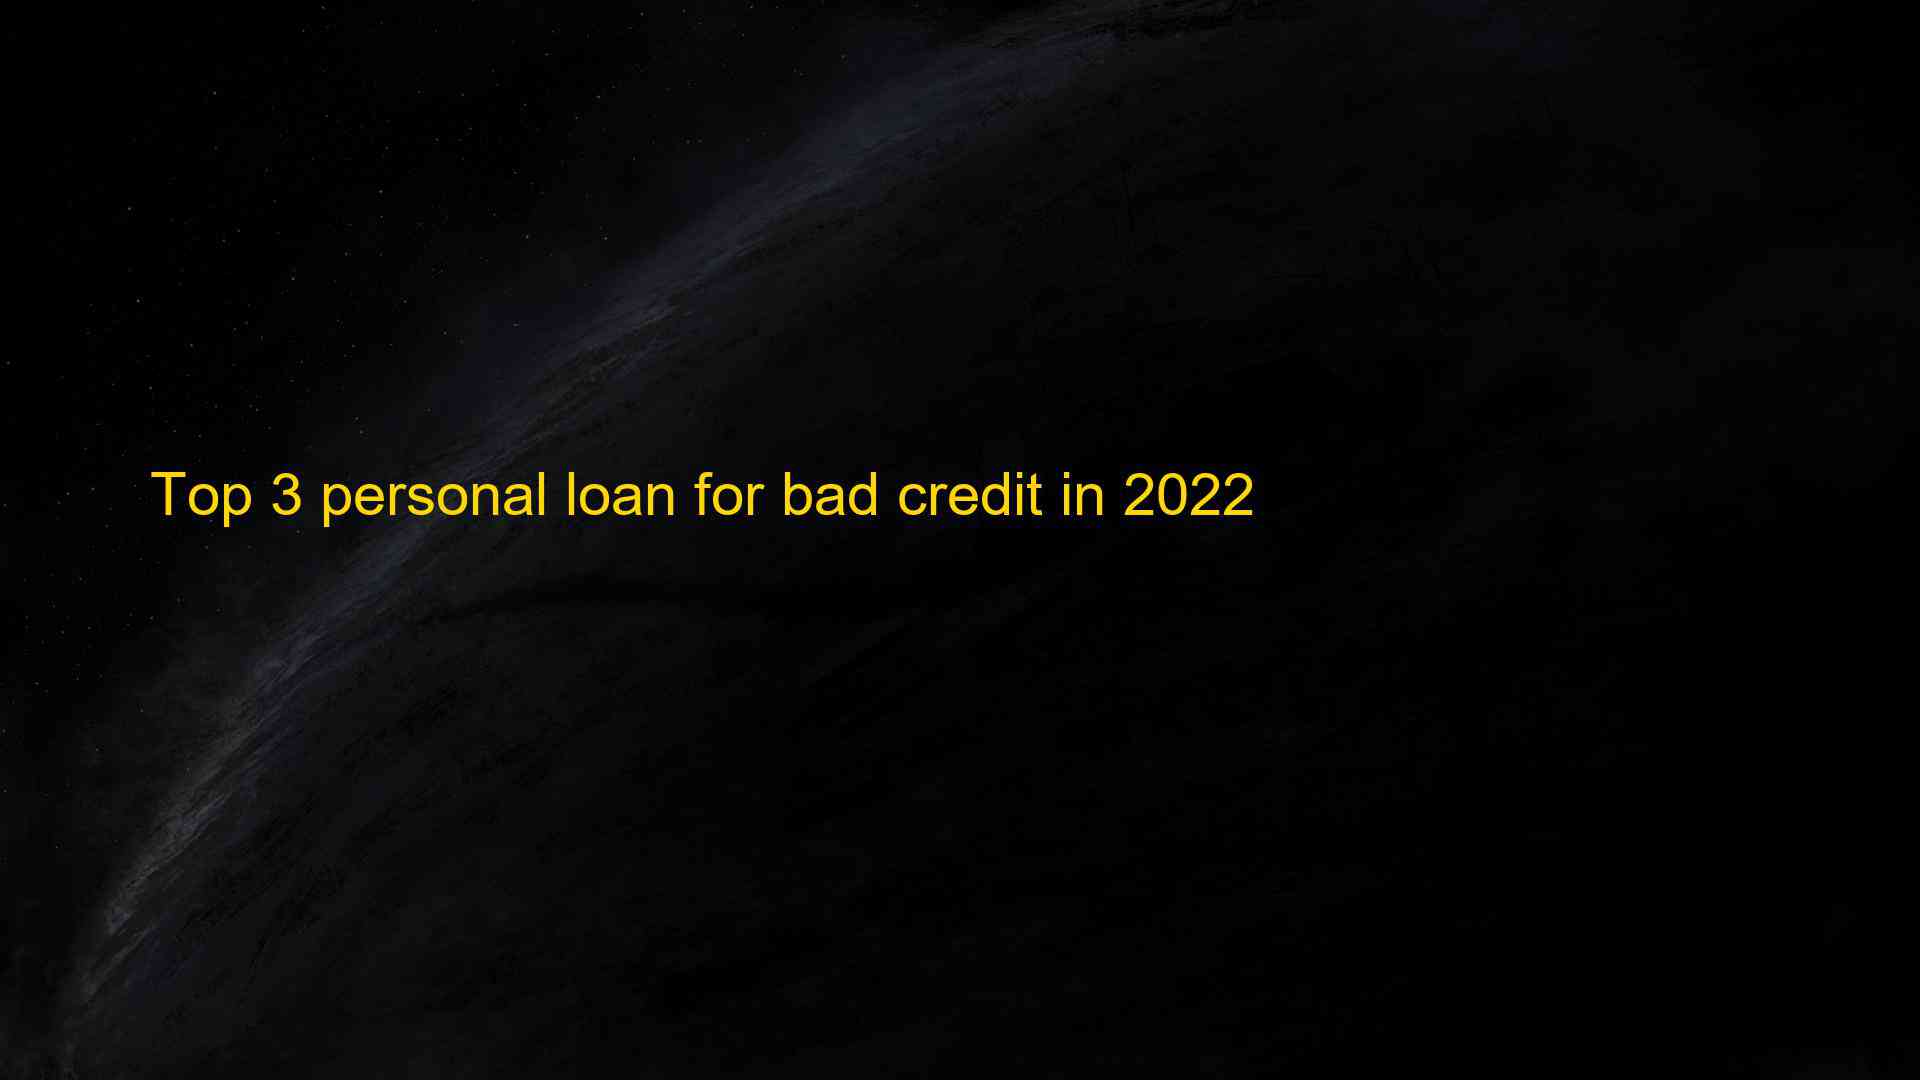 Top 3 personal loan for bad credit in 2022 1659602743